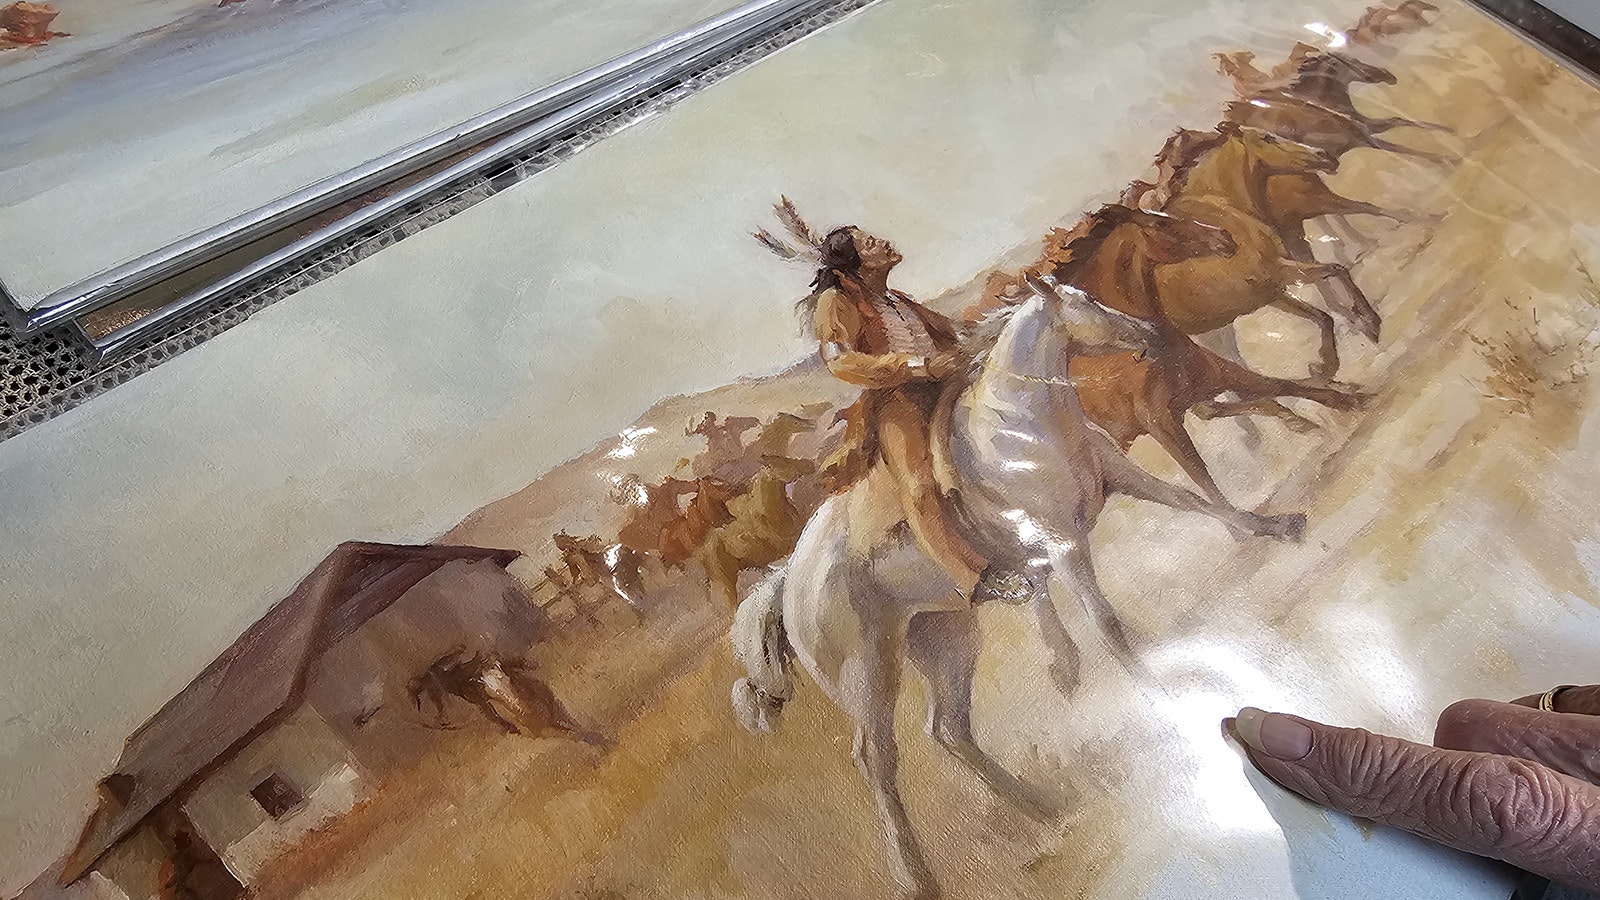 See how the horses tails are tied up? It's just one of the many historical details Schaffner took care to get right in a series of historical paintings she made for interpretive signs at the Lingle turnout.